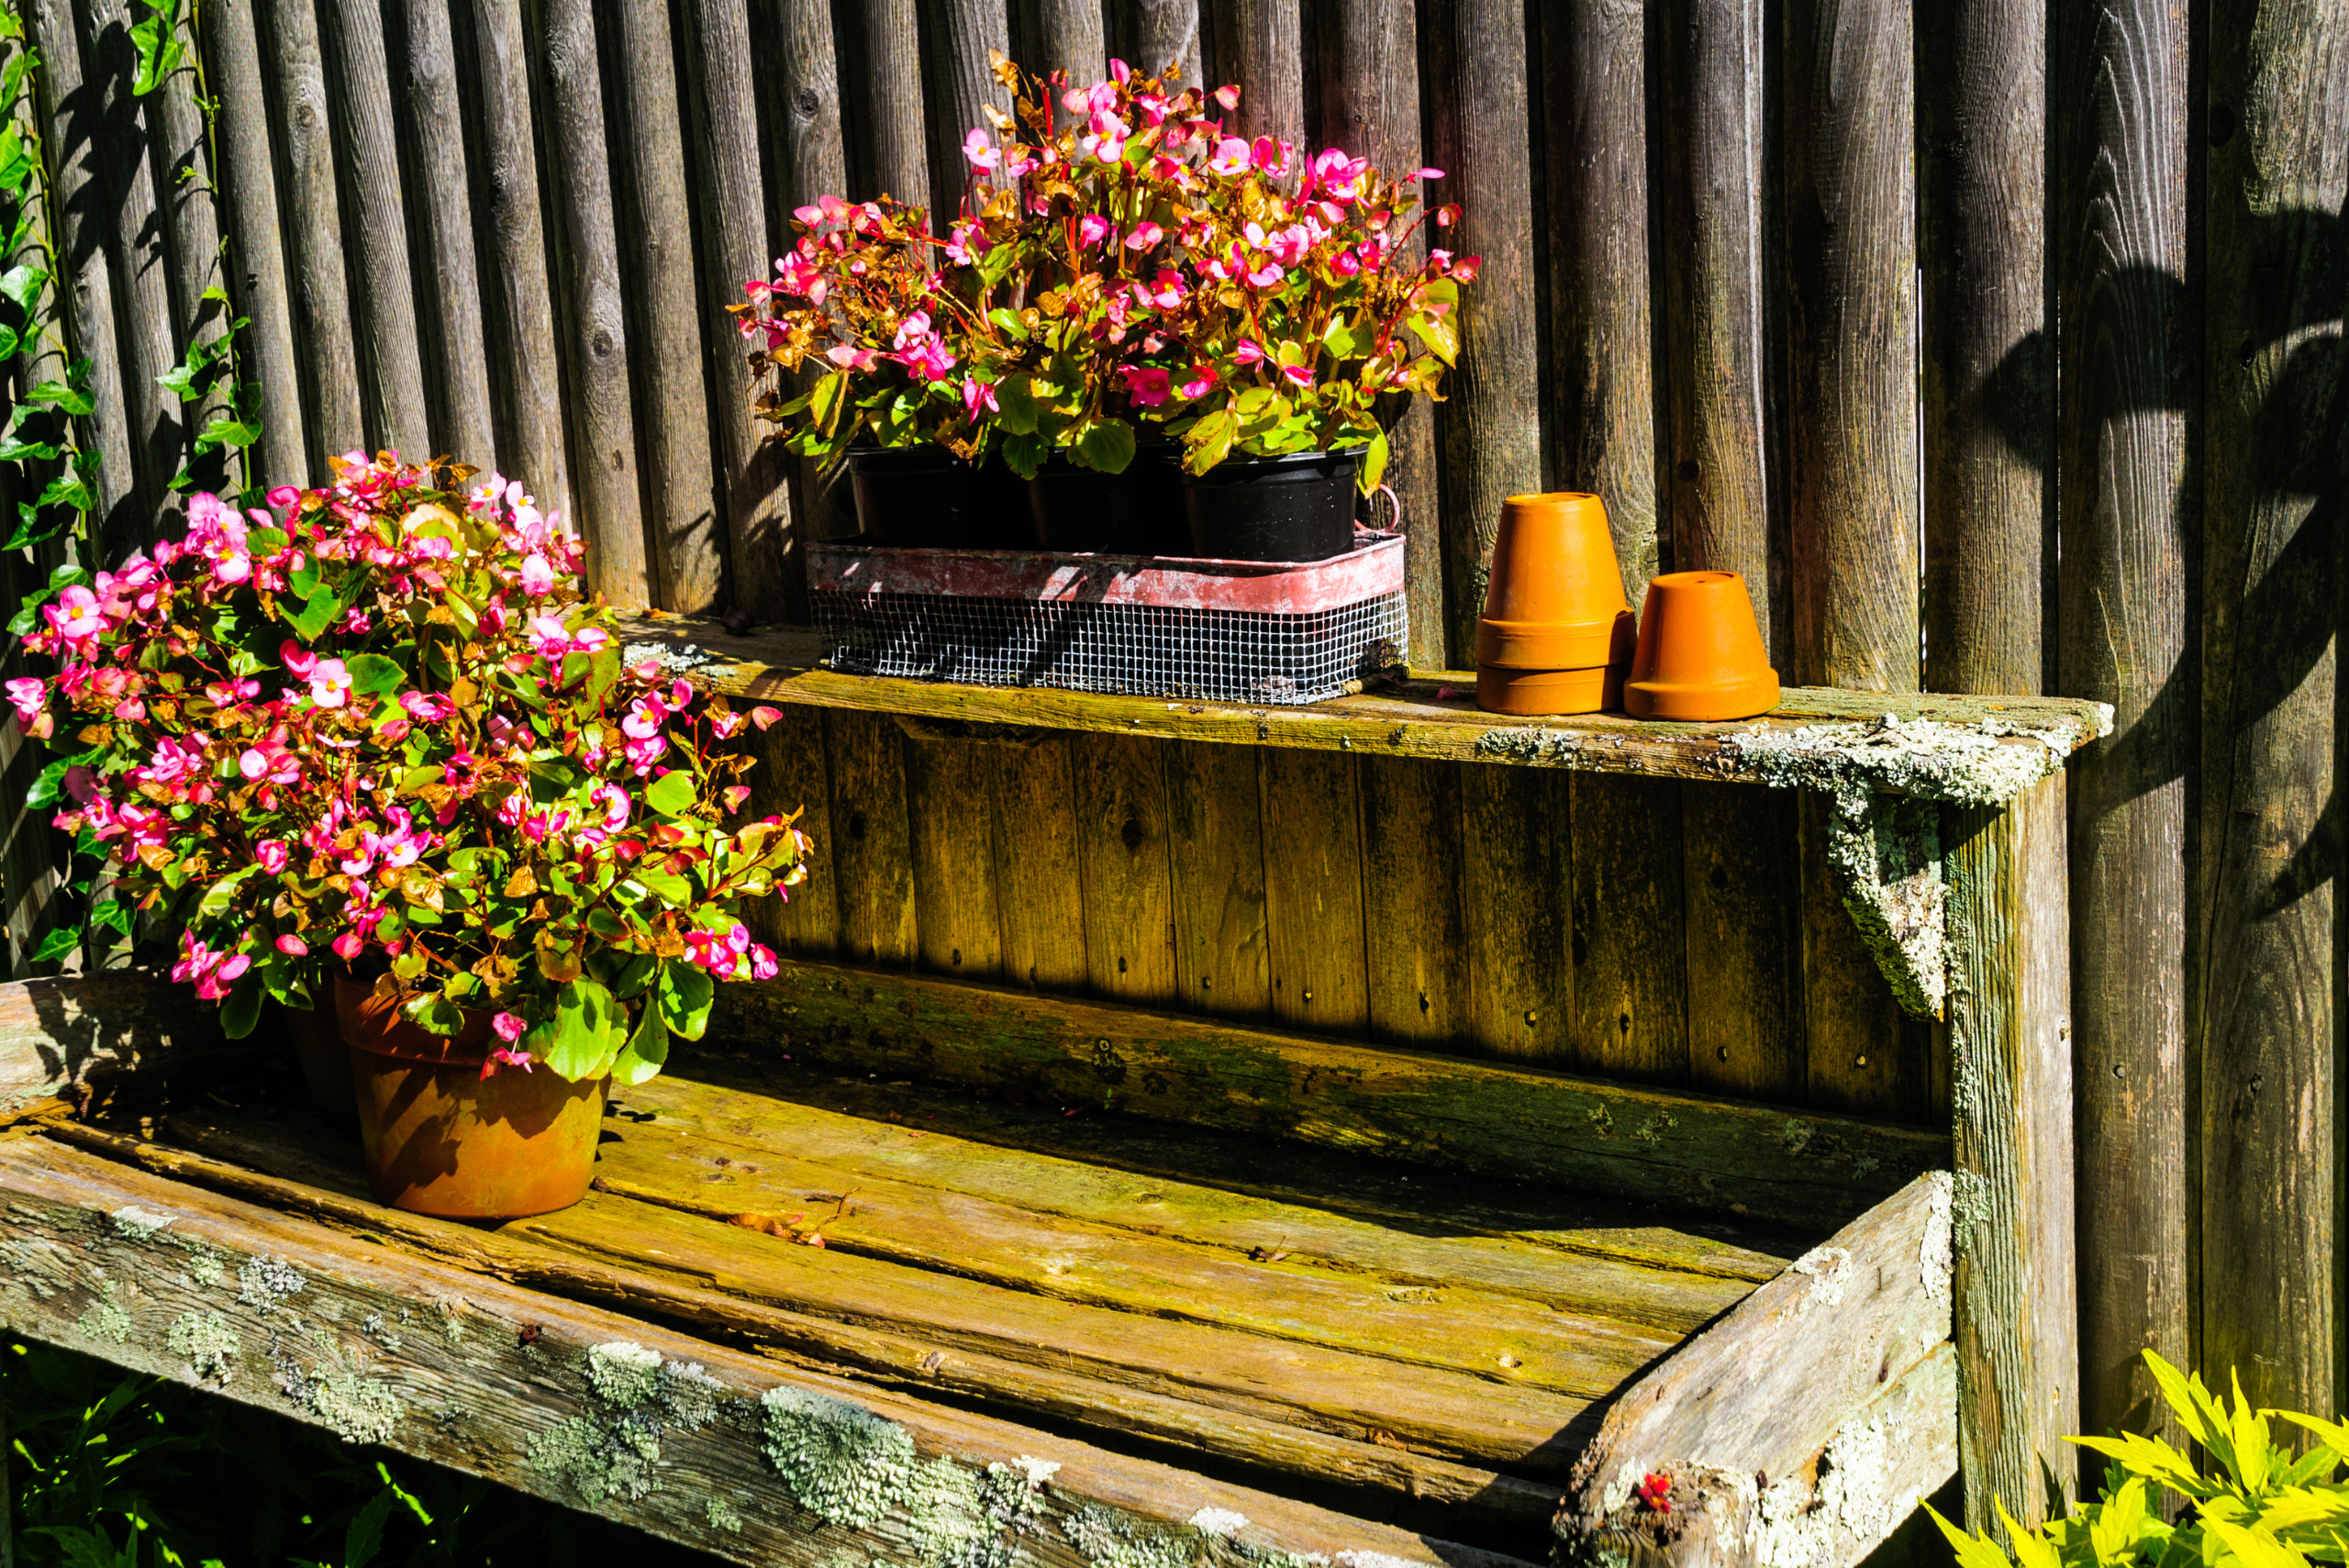 A wooden potting bench for plants.